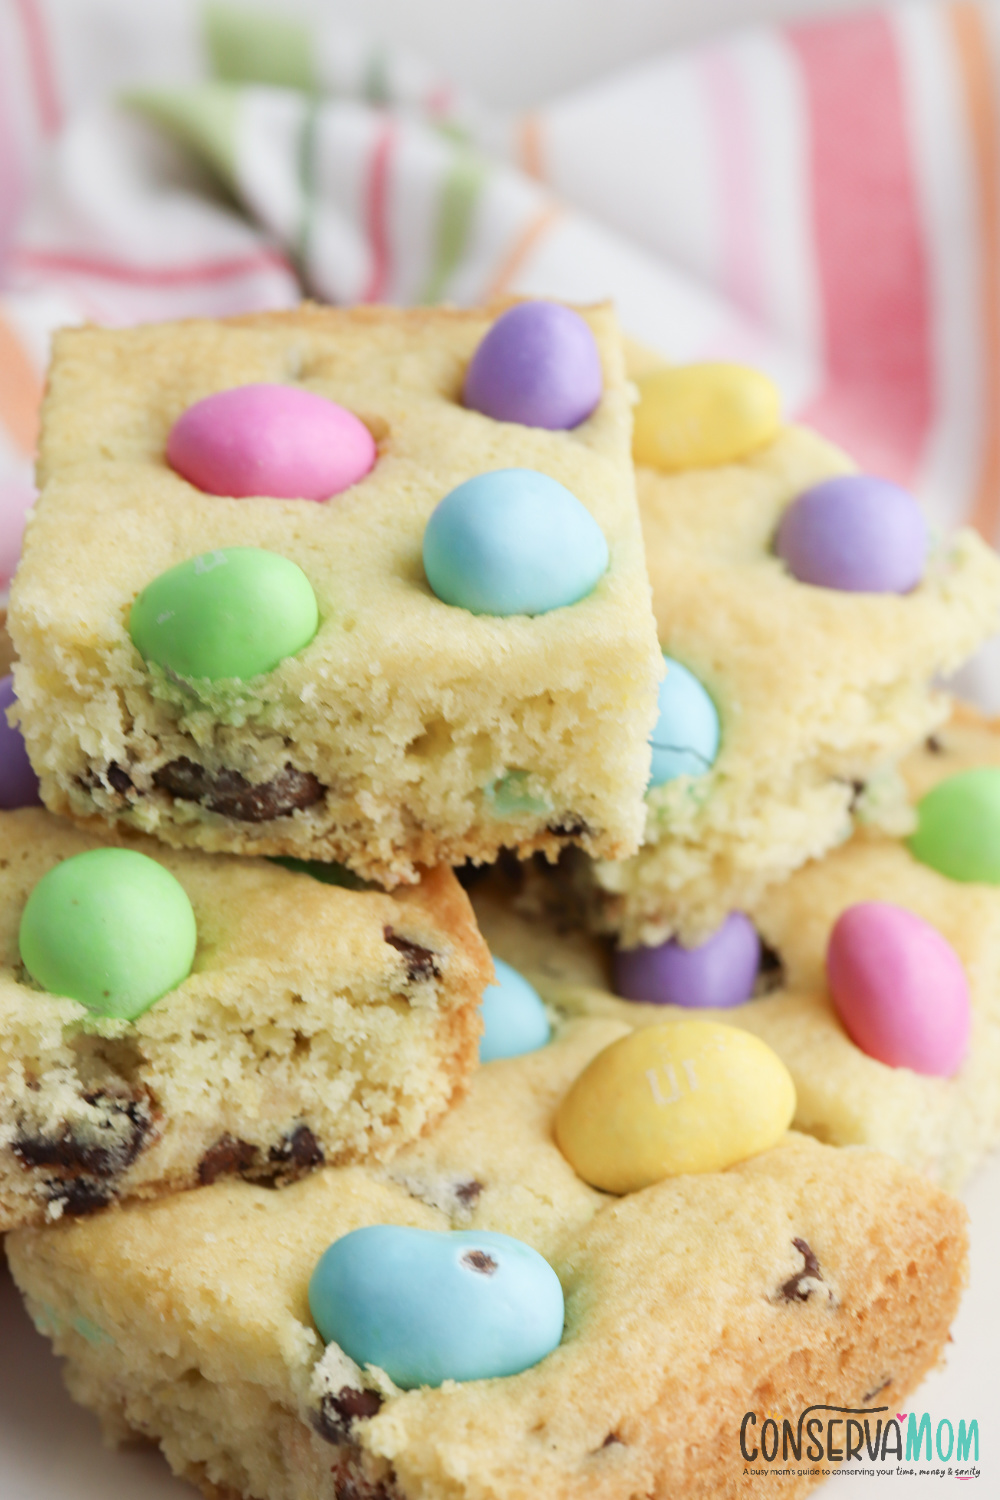 Easter Cake Mix Cookie Bars